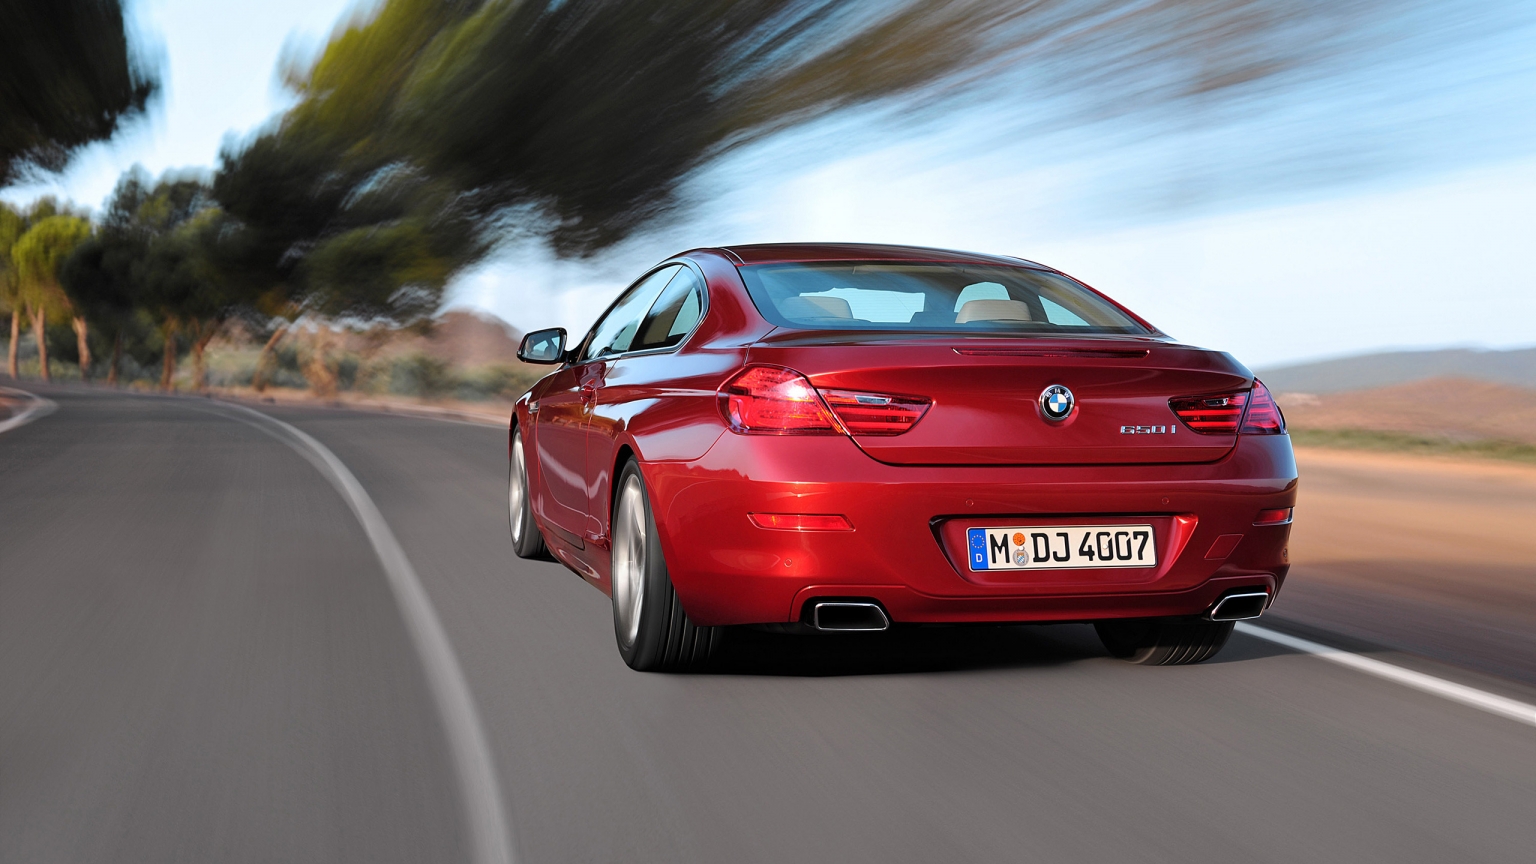 BMW 650i Coupe Rear for 1536 x 864 HDTV resolution